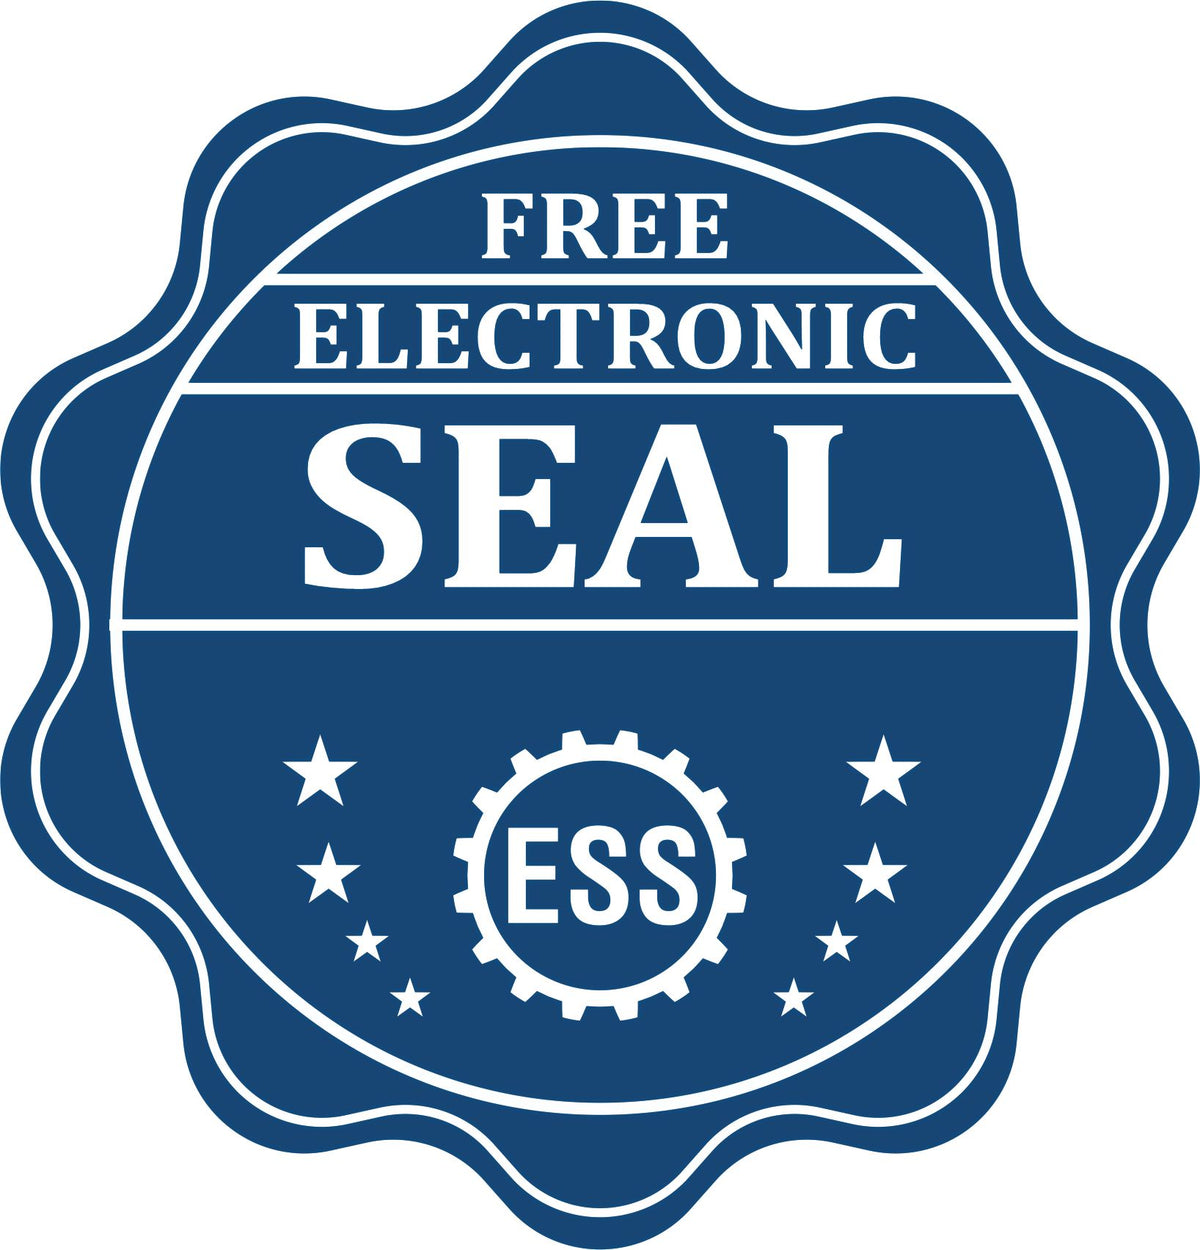 A badge showing a free electronic seal for the Wooden Handle Missouri Rectangular Notary Public Stamp with stars and the ESS gear on the emblem.